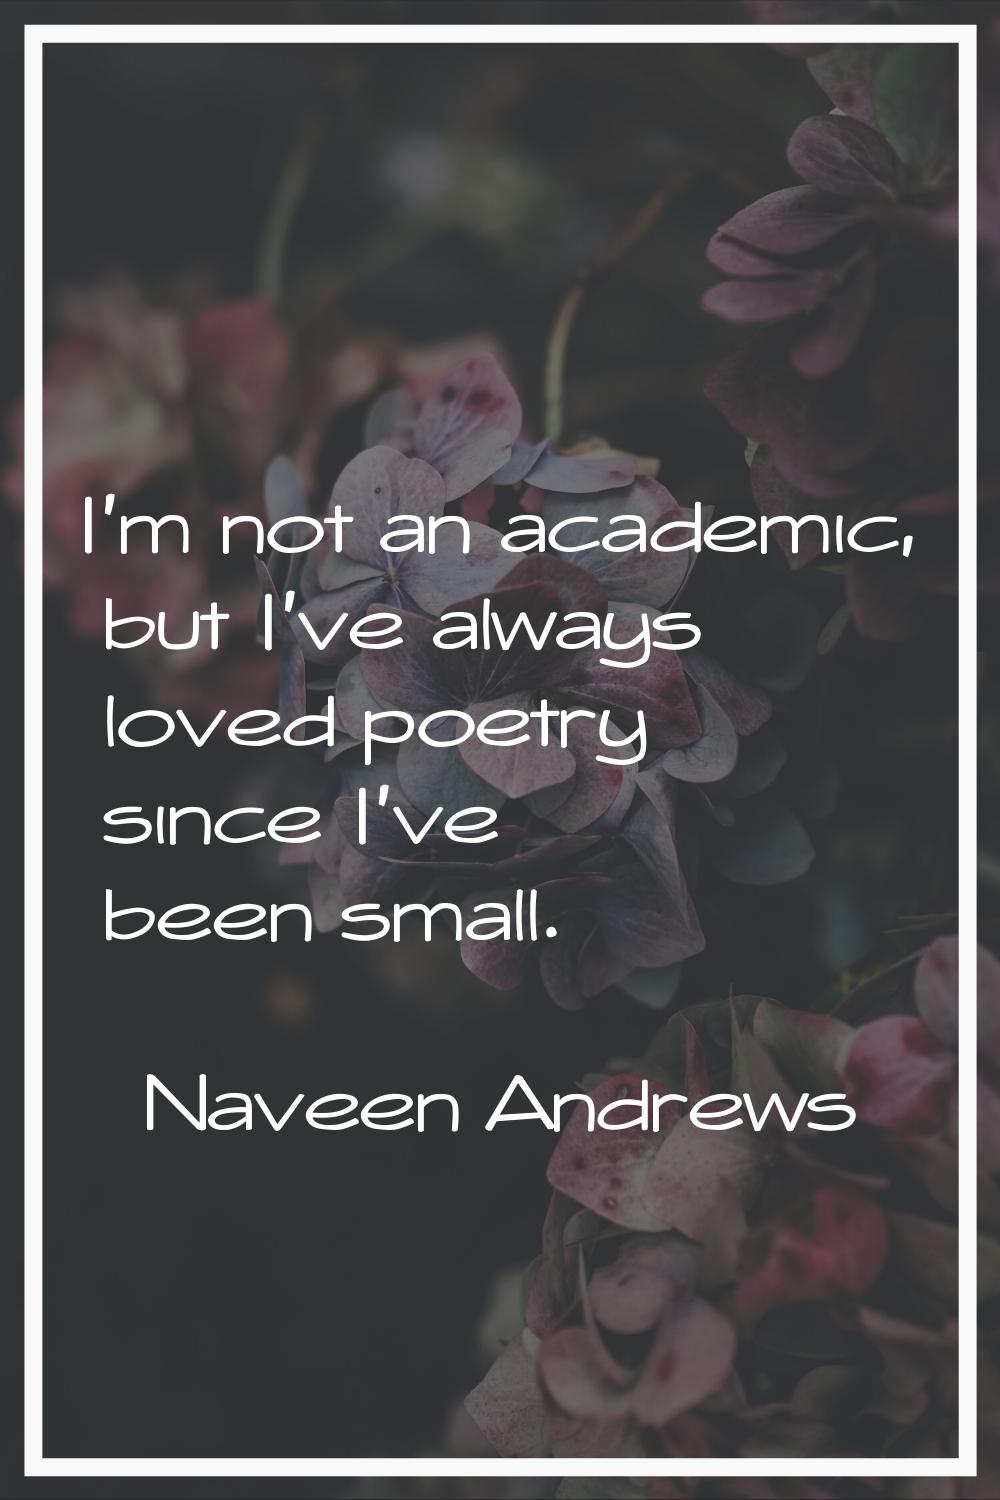 I'm not an academic, but I've always loved poetry since I've been small.